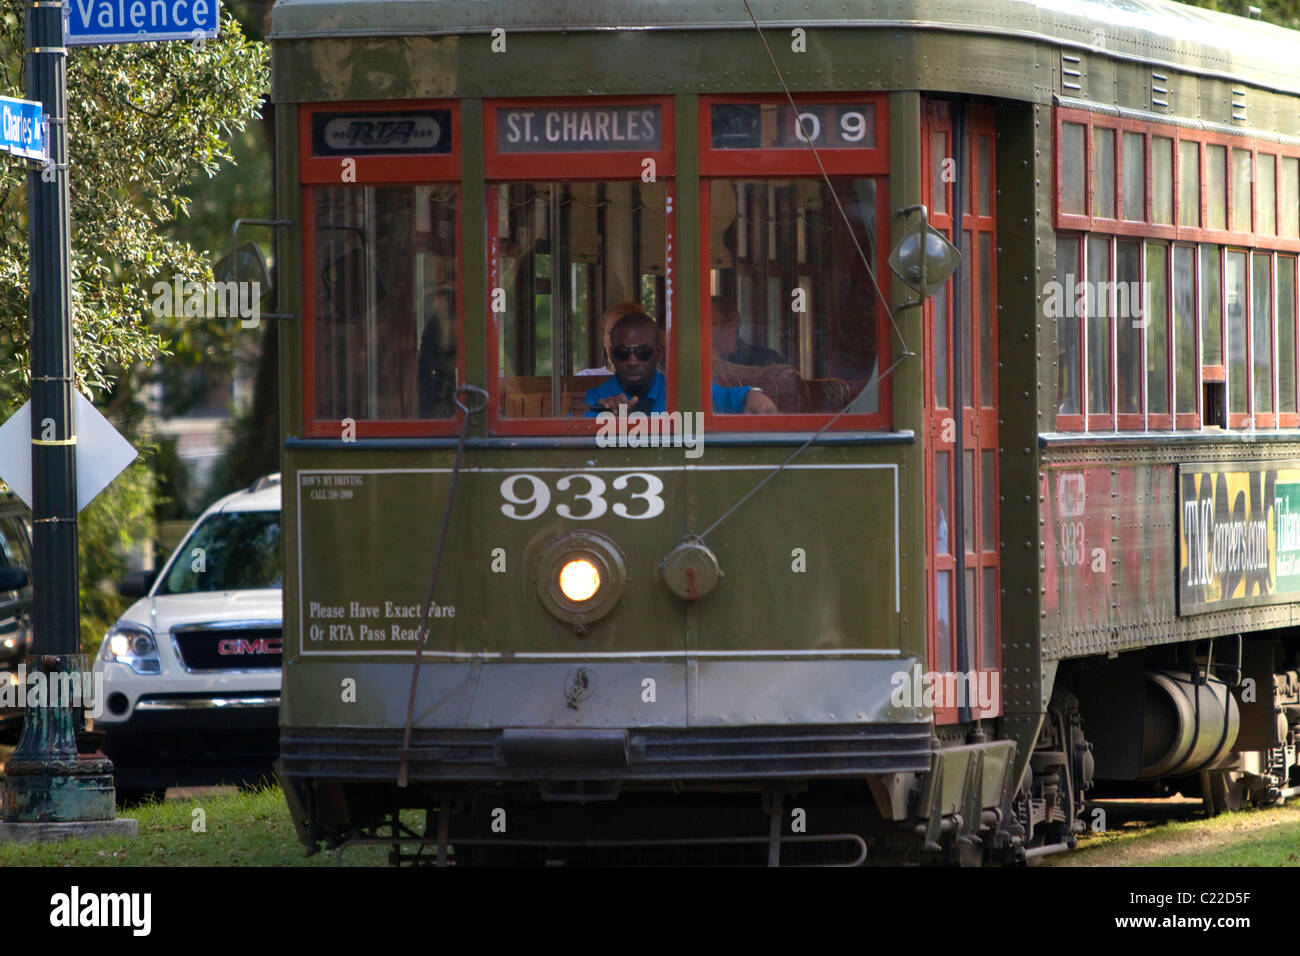 St. Charles Streetcar Line in the Garden District of New Orleans, Louisiana, USA. Stock Photo